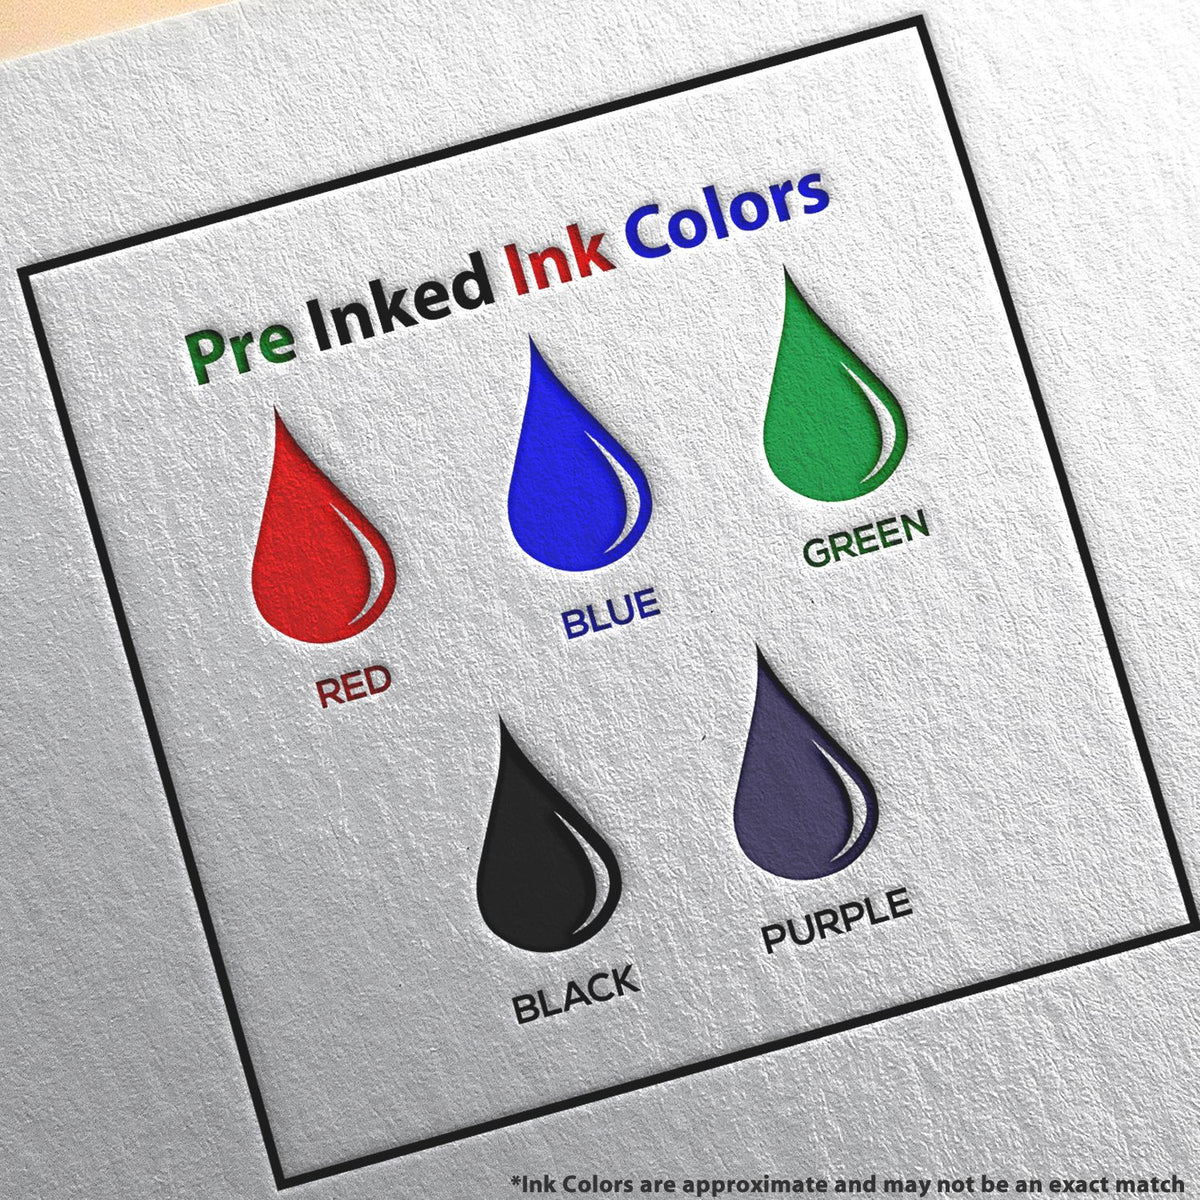 A picture showing the different ink colors or hues available for the Premium MaxLight Pre-Inked Arizona Engineering Stamp product.